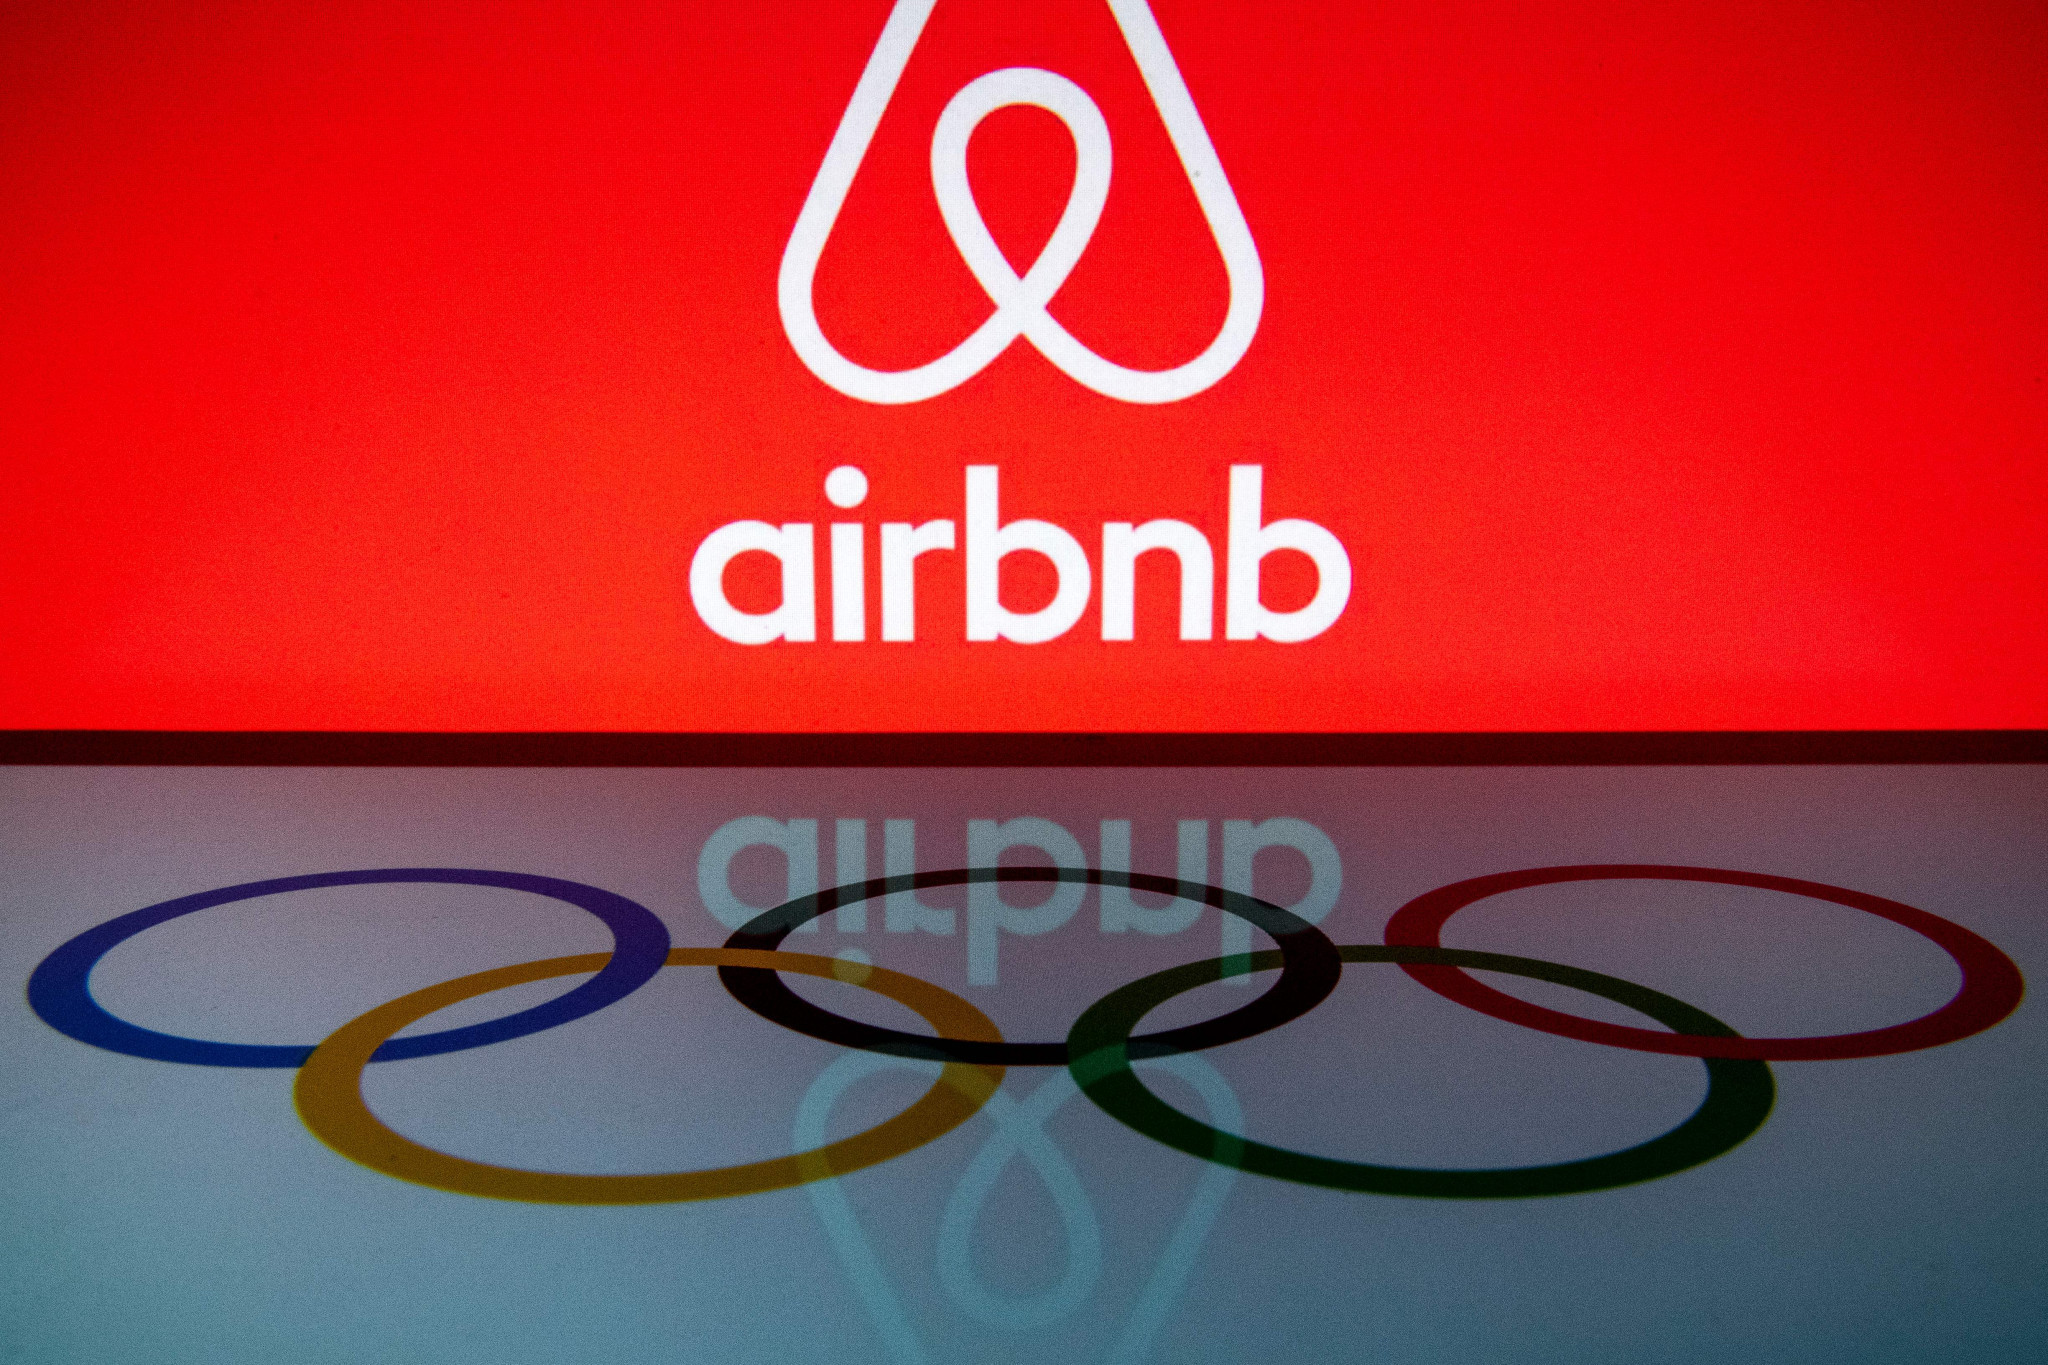 Shares in Airbnb more than doubled on the IOC sponsor's first day of market trading ©Getty Images